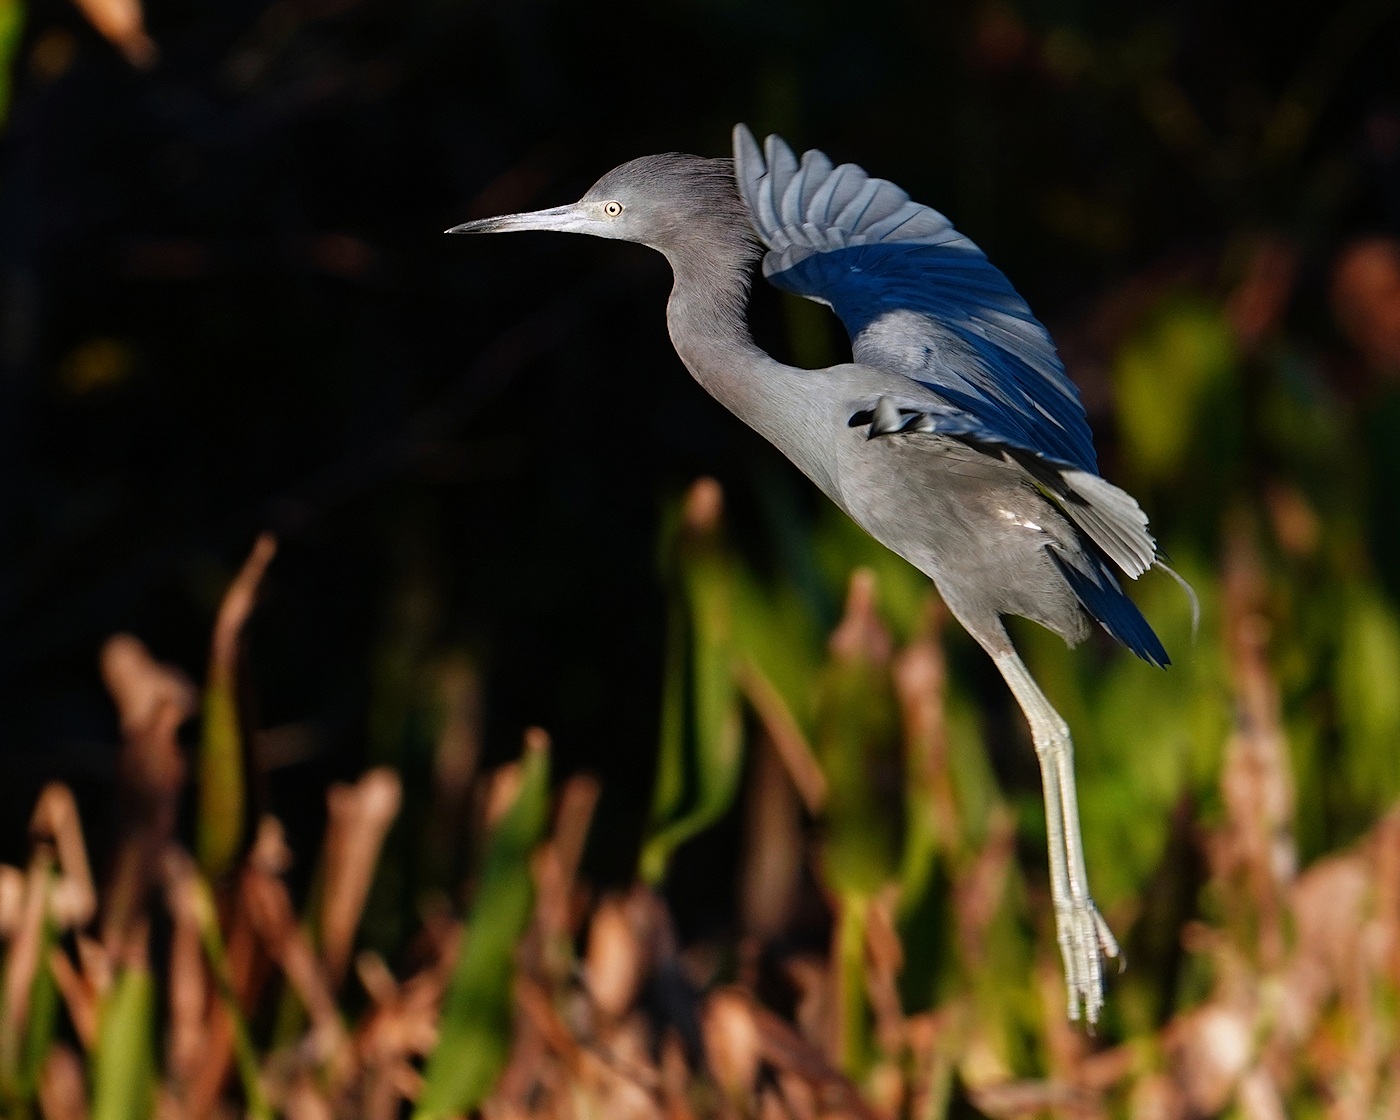 Little blue heron about to land